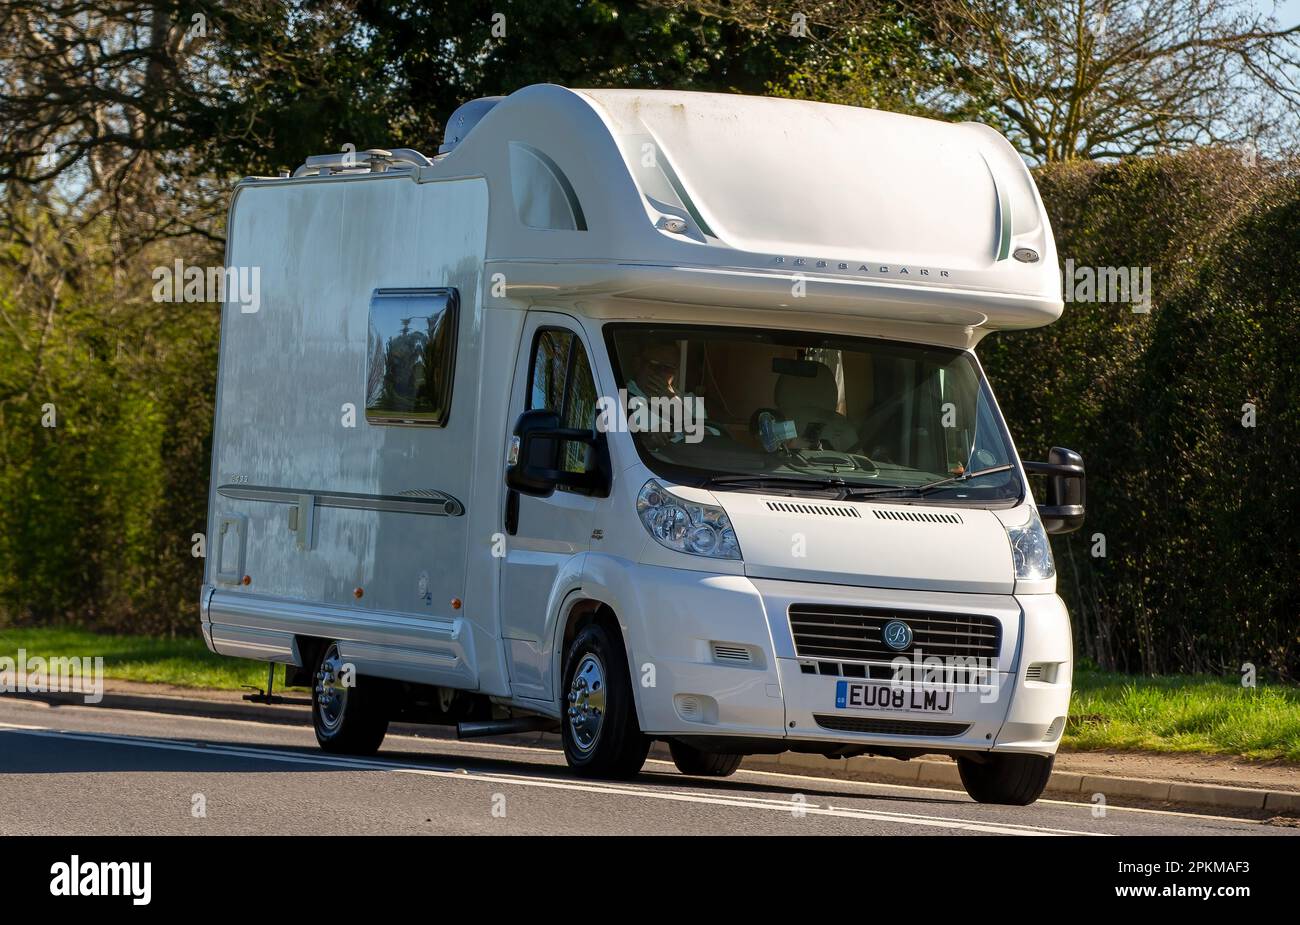 All About the Fiat Ducato Series 8 Motorhome Platform